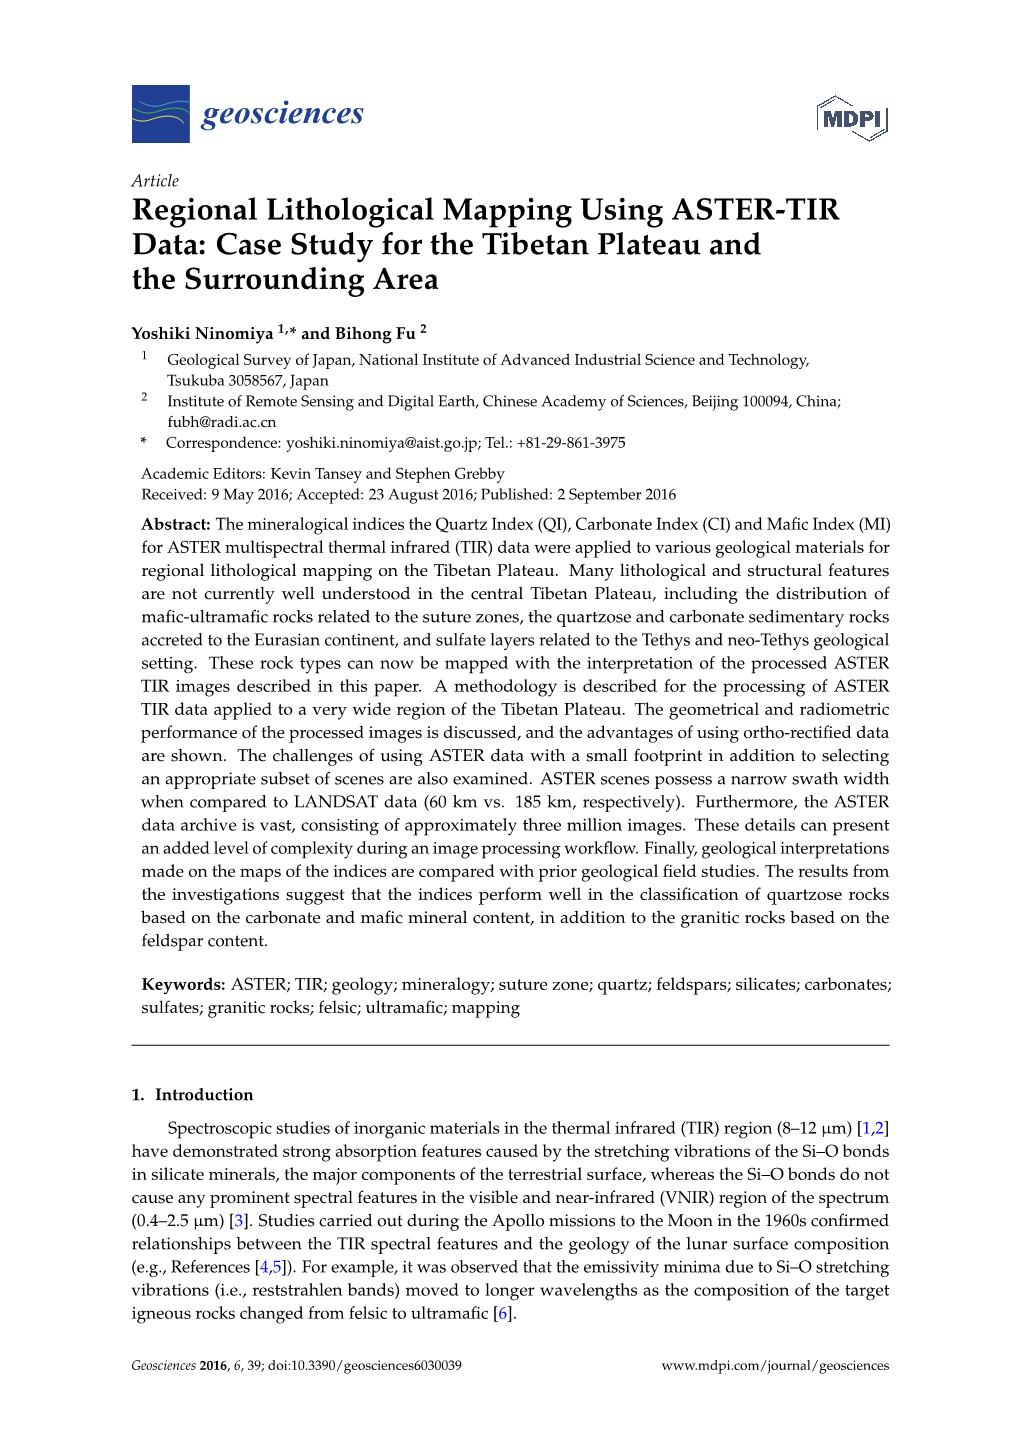 Regional Lithological Mapping Using ASTER-TIR Data: Case Study for the Tibetan Plateau and the Surrounding Area